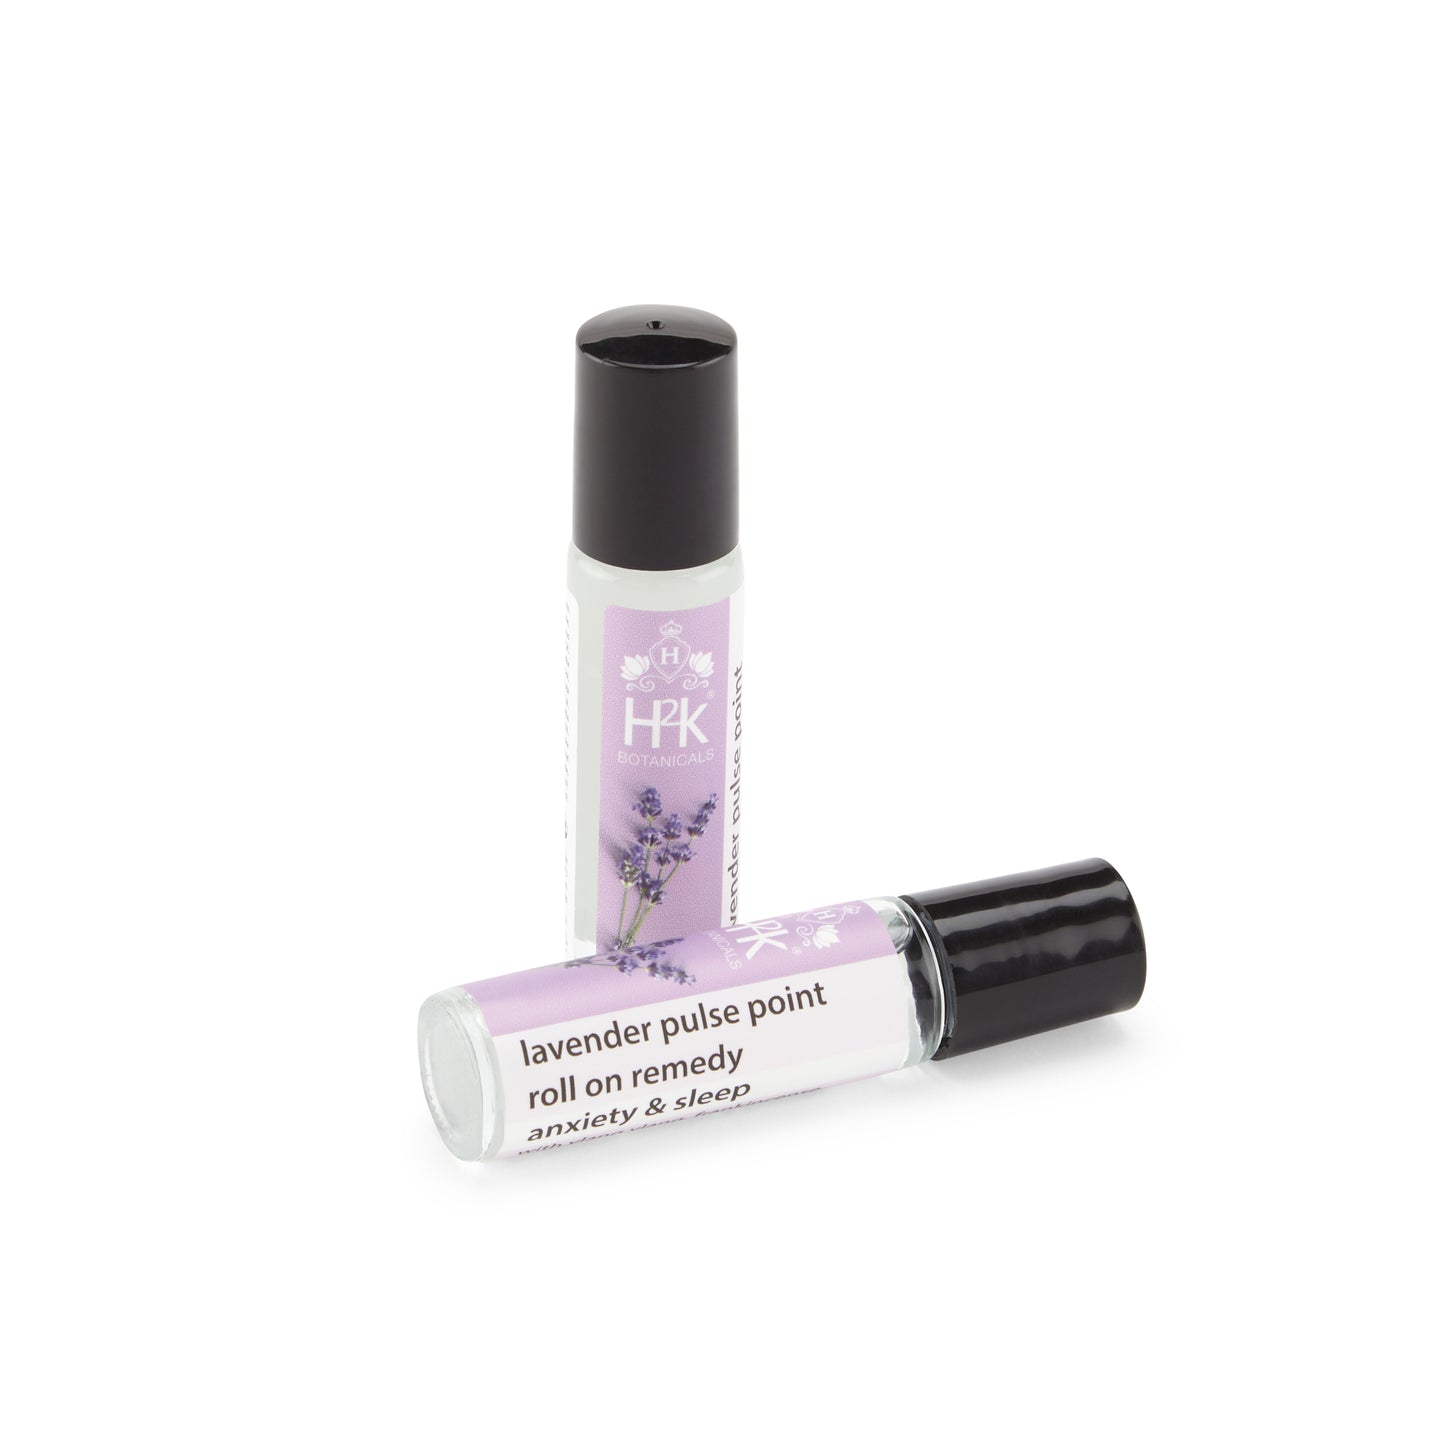 Menopause Bundle: Lavender Pulse Point Roll-on with 30ml OMG Magnesium Sensitive Spray